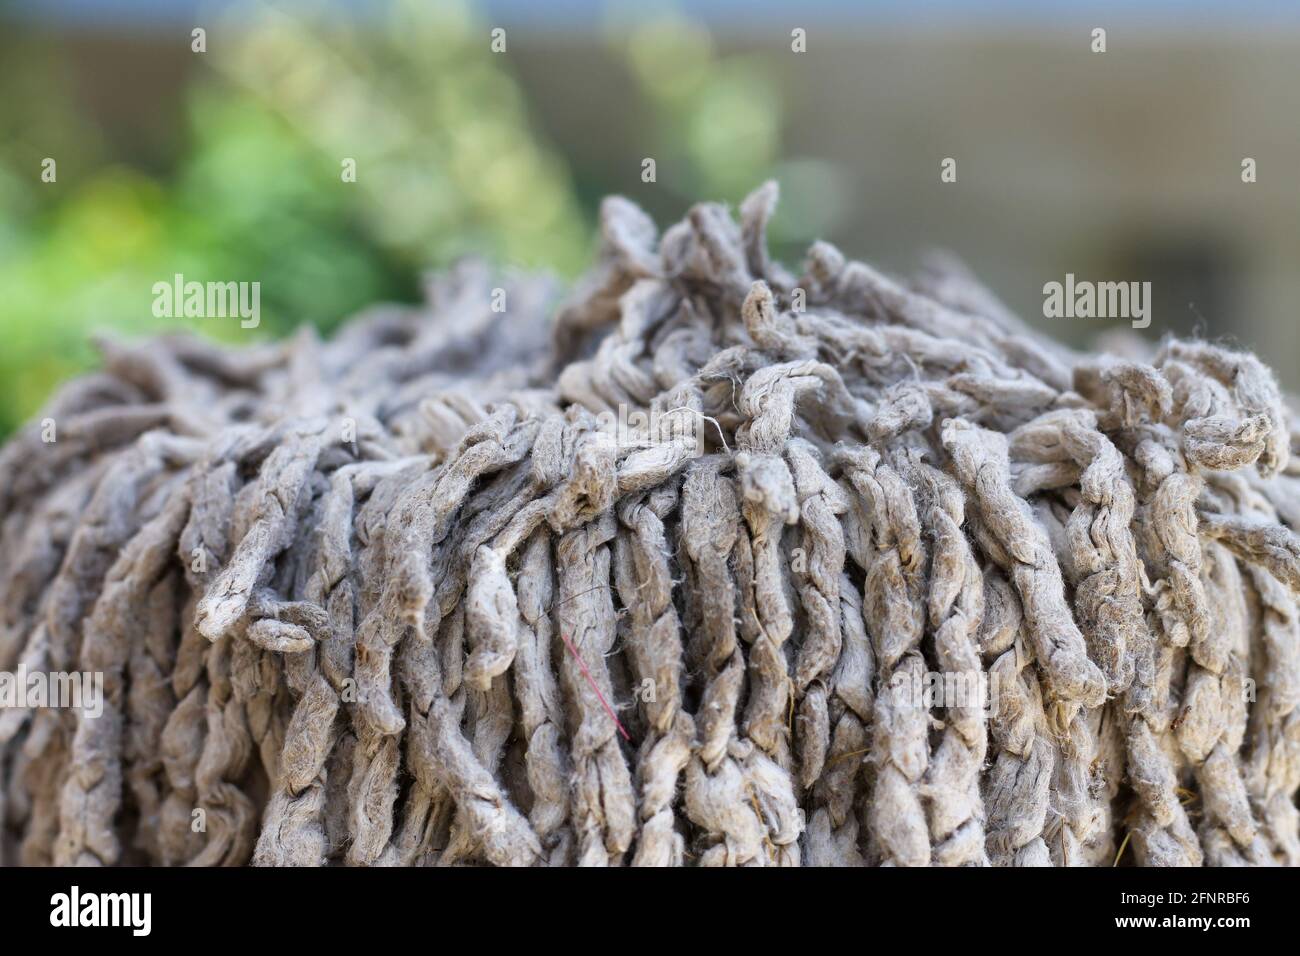 The white fibers of the mop are dirty. View from close up Stock Photo